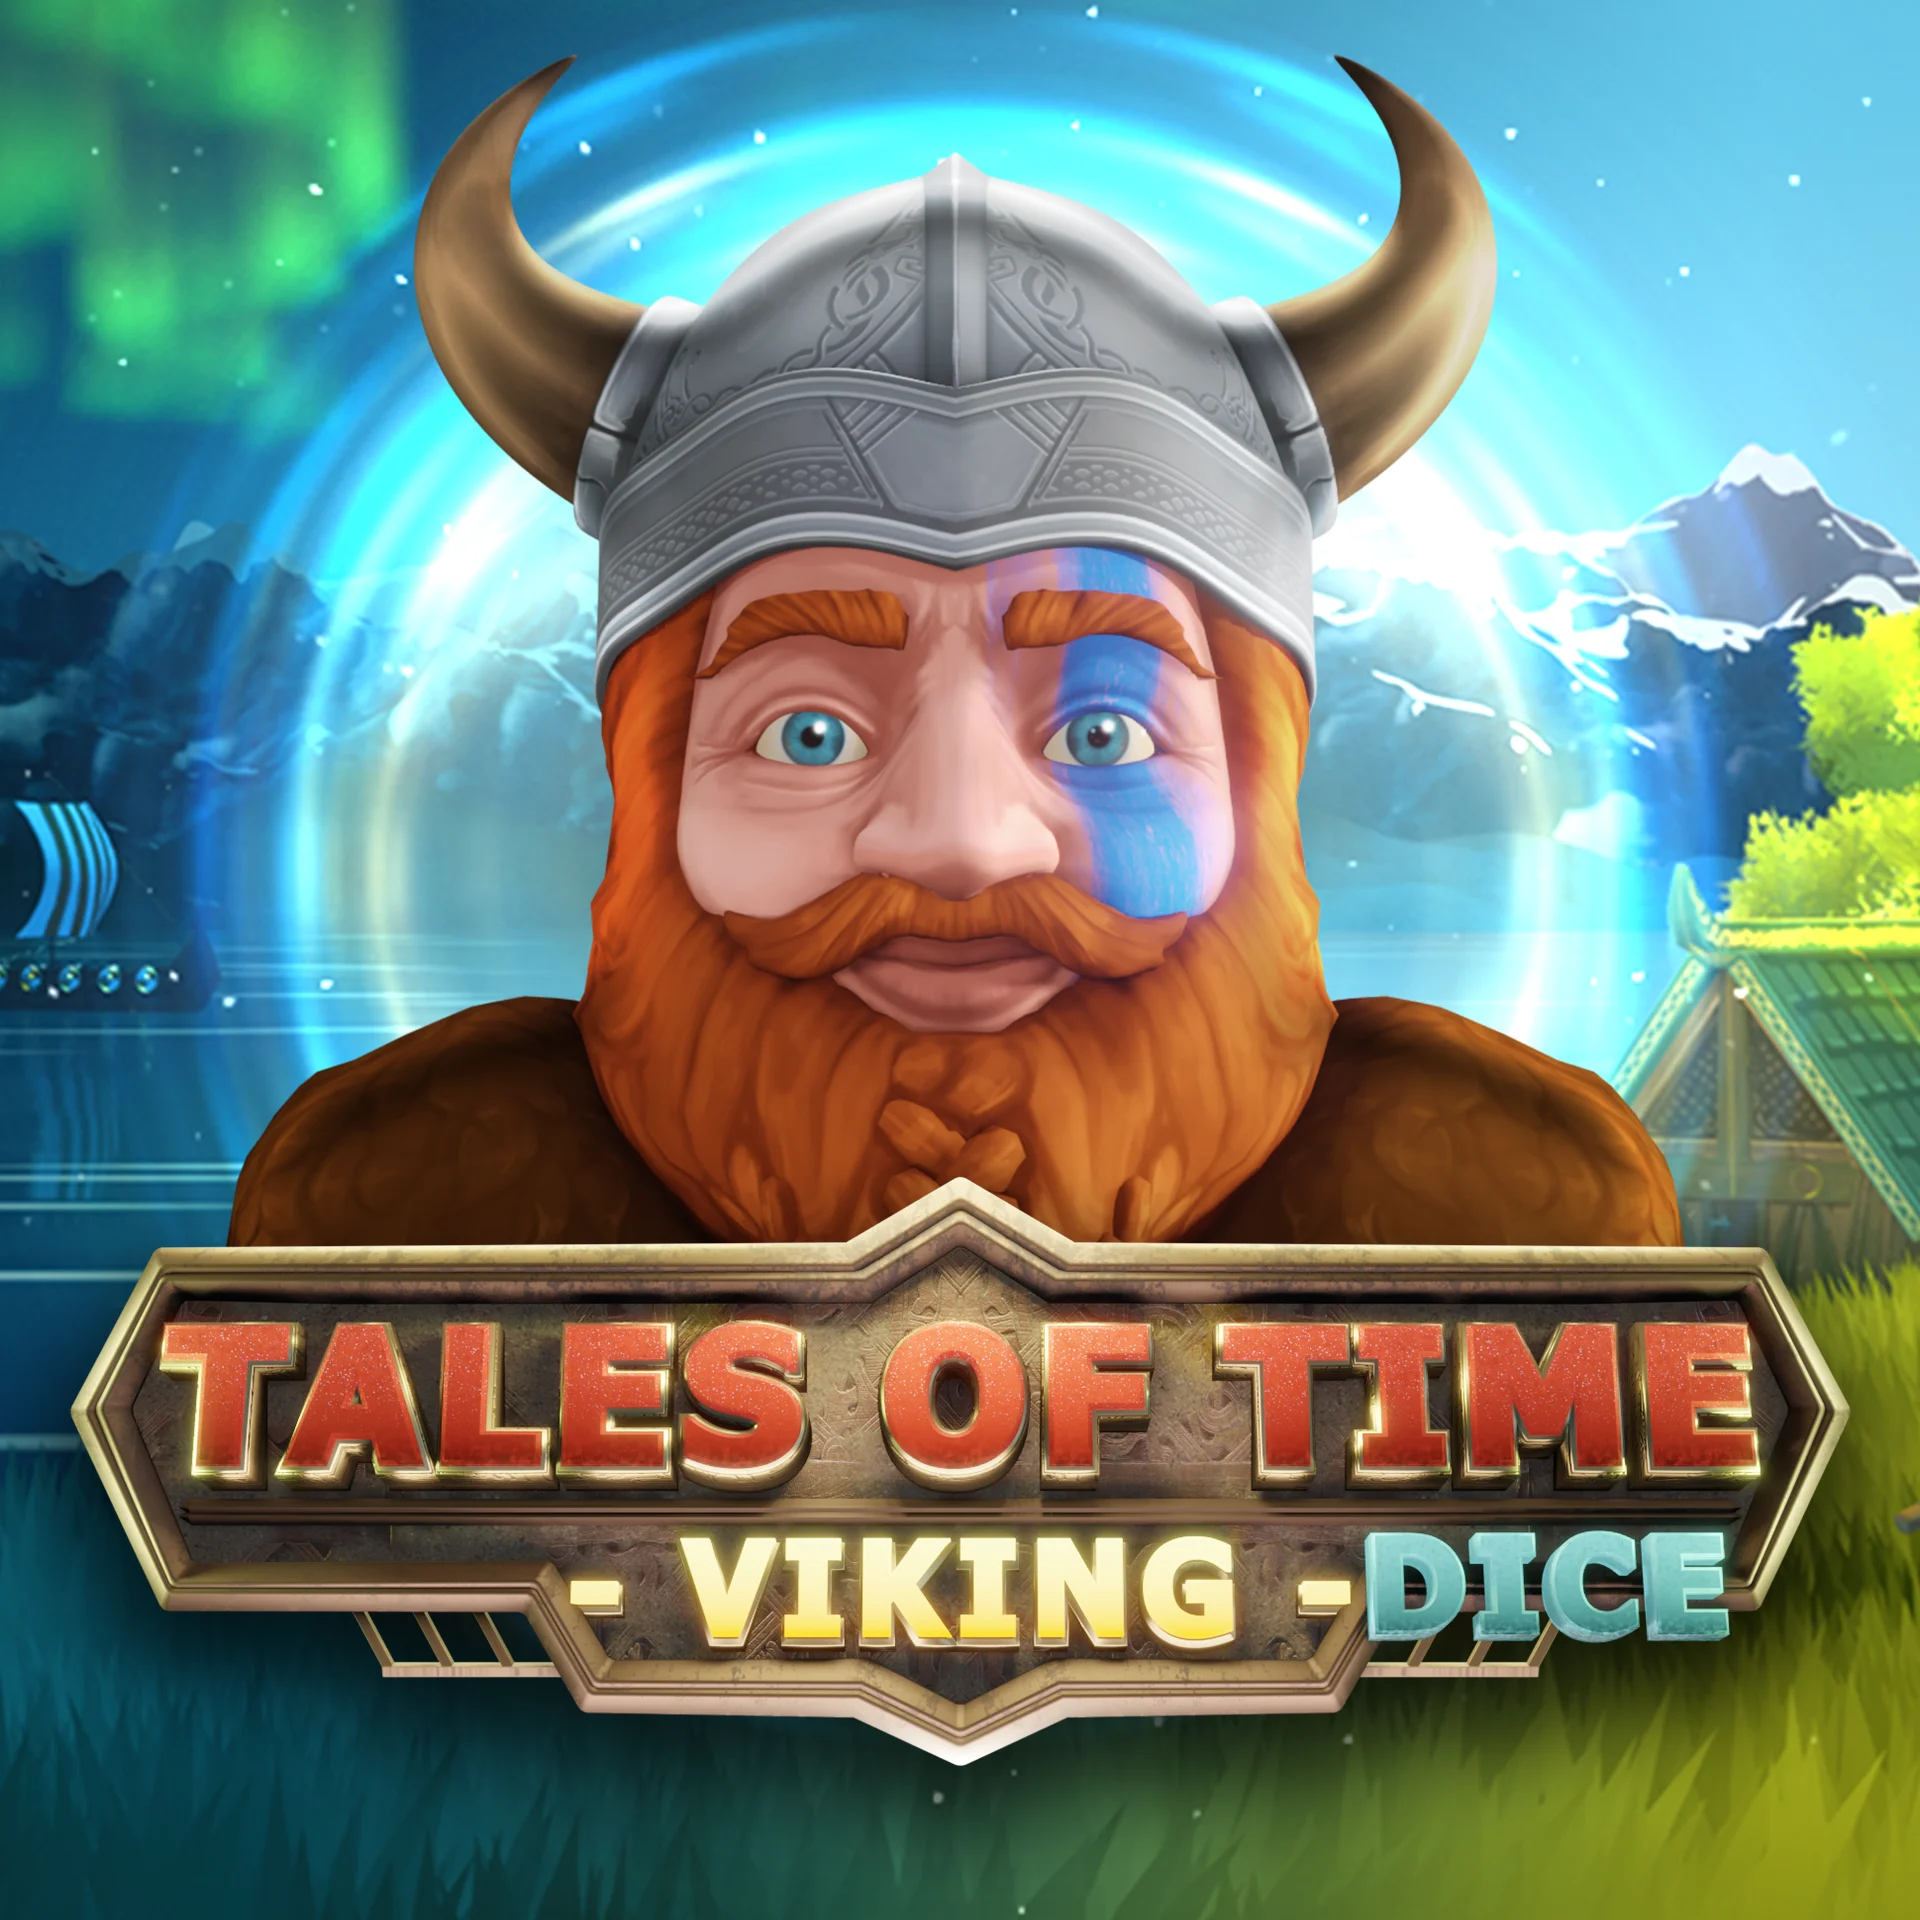 Play Tales Of Time Viking Dice on Starcasinodice online casino